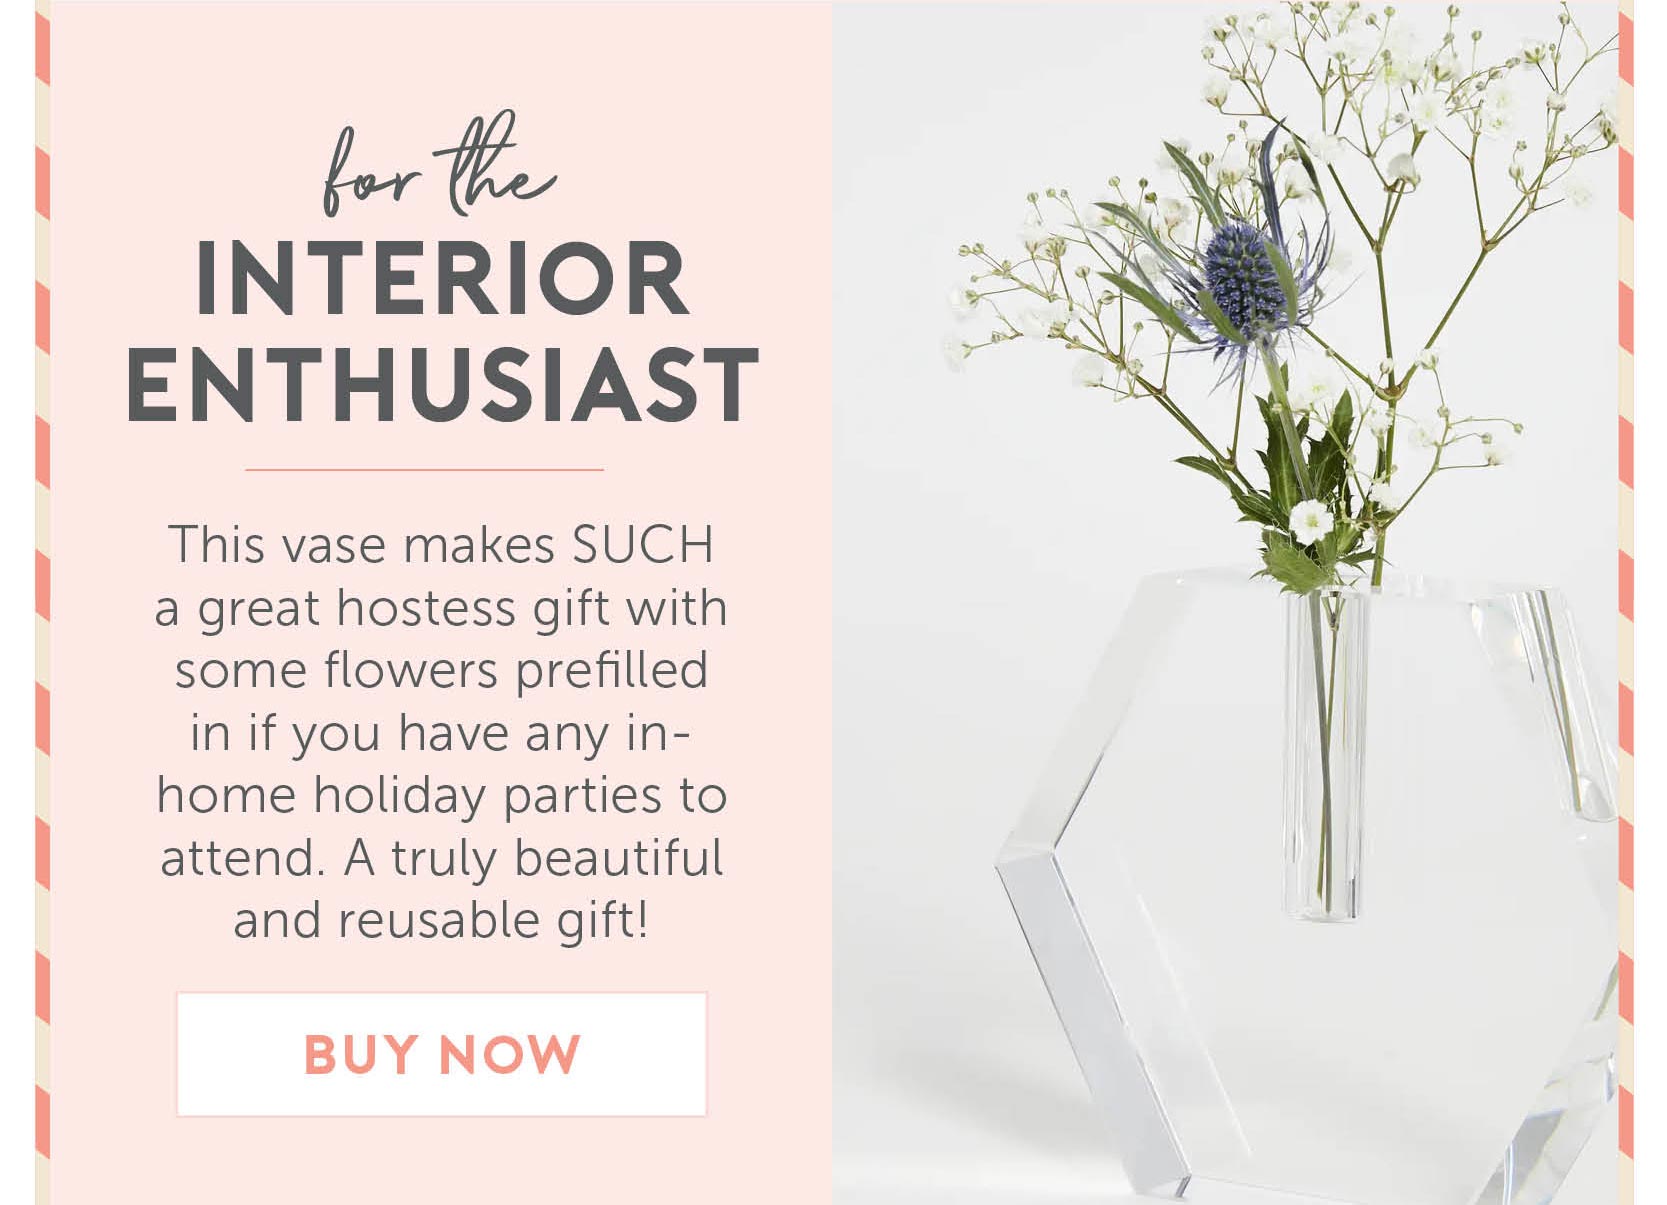 For The Interior Enthusiast - This vase makes SUCH a great hostess gift with some flowers prefilled in if you have any in-home holiday parties to attend. A truly beautiful and reusable gift!